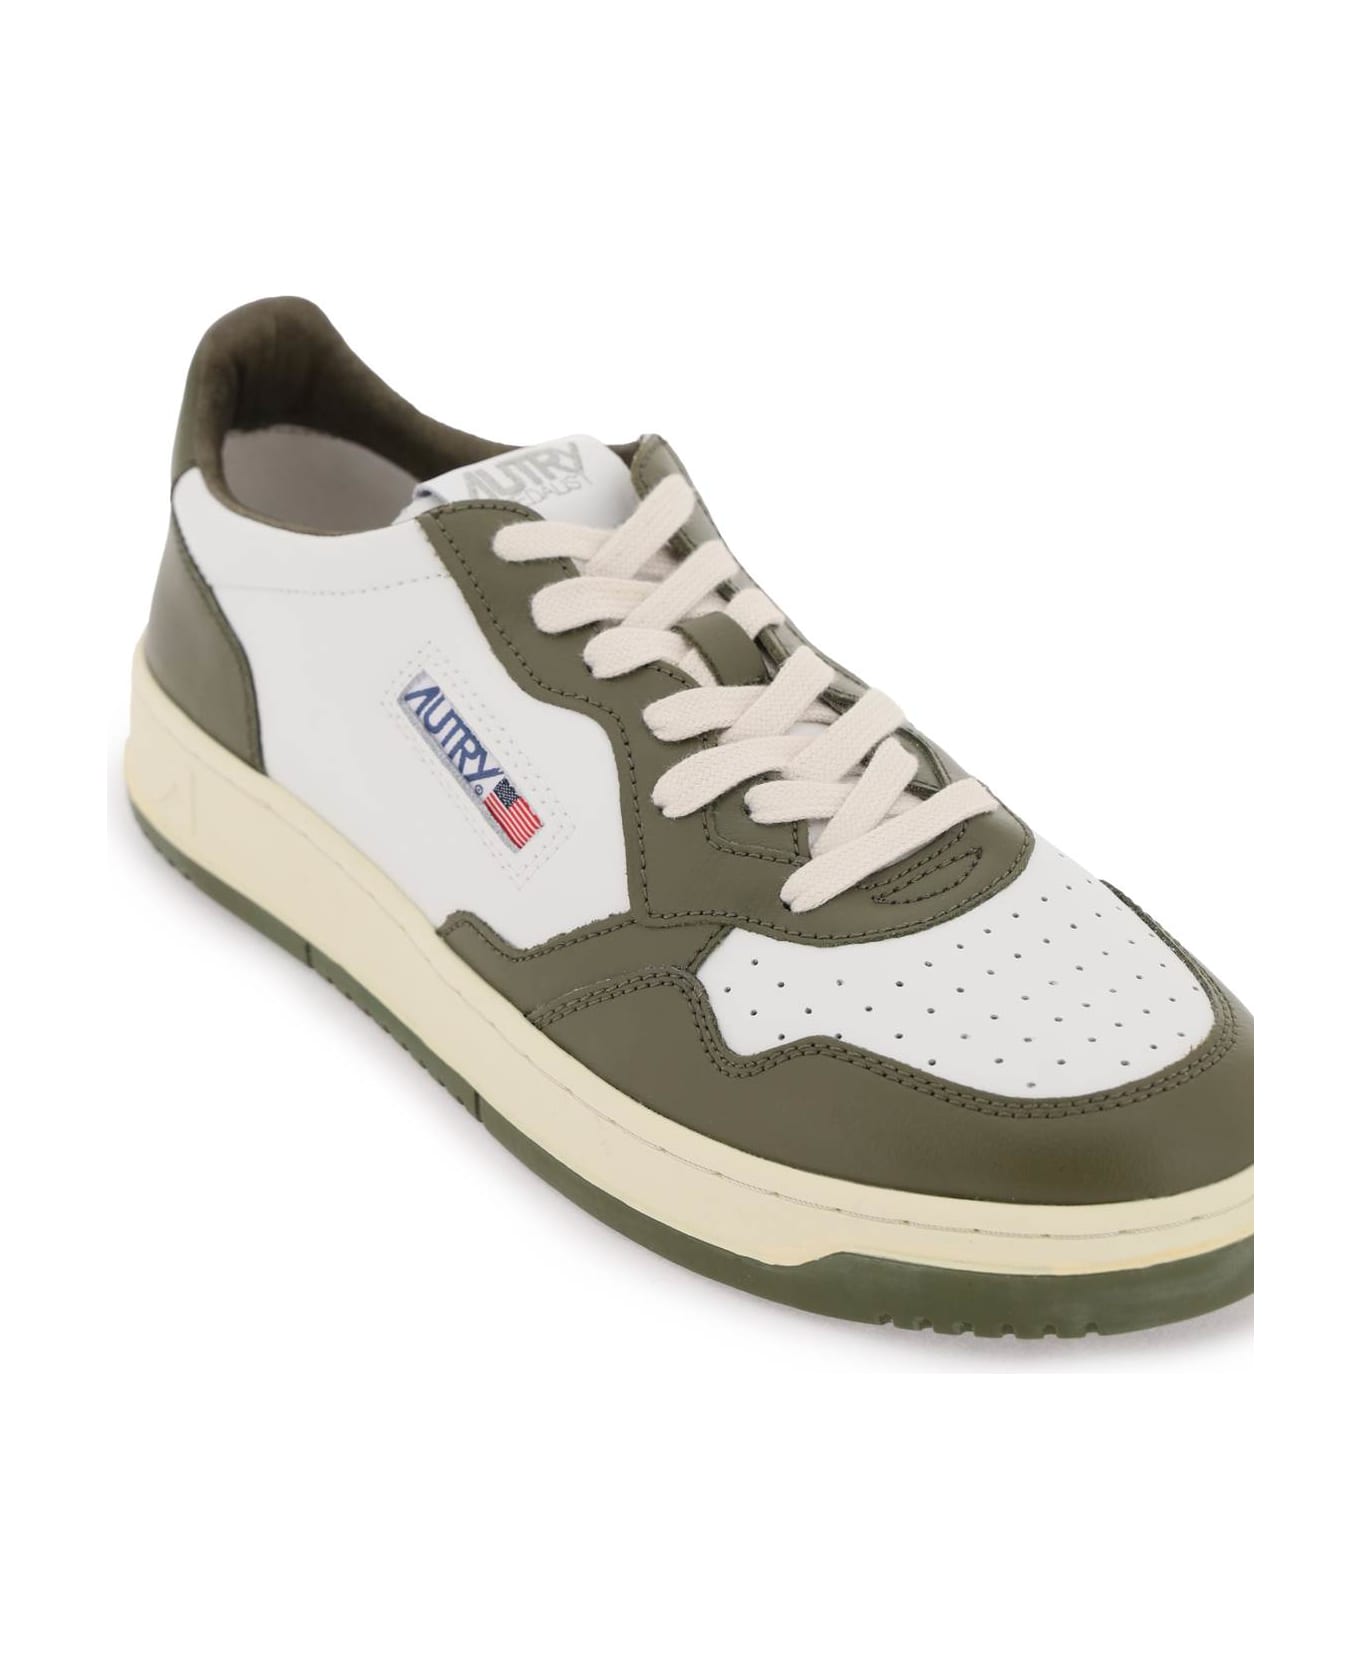 Autry Medalist Low Sneakers - Green